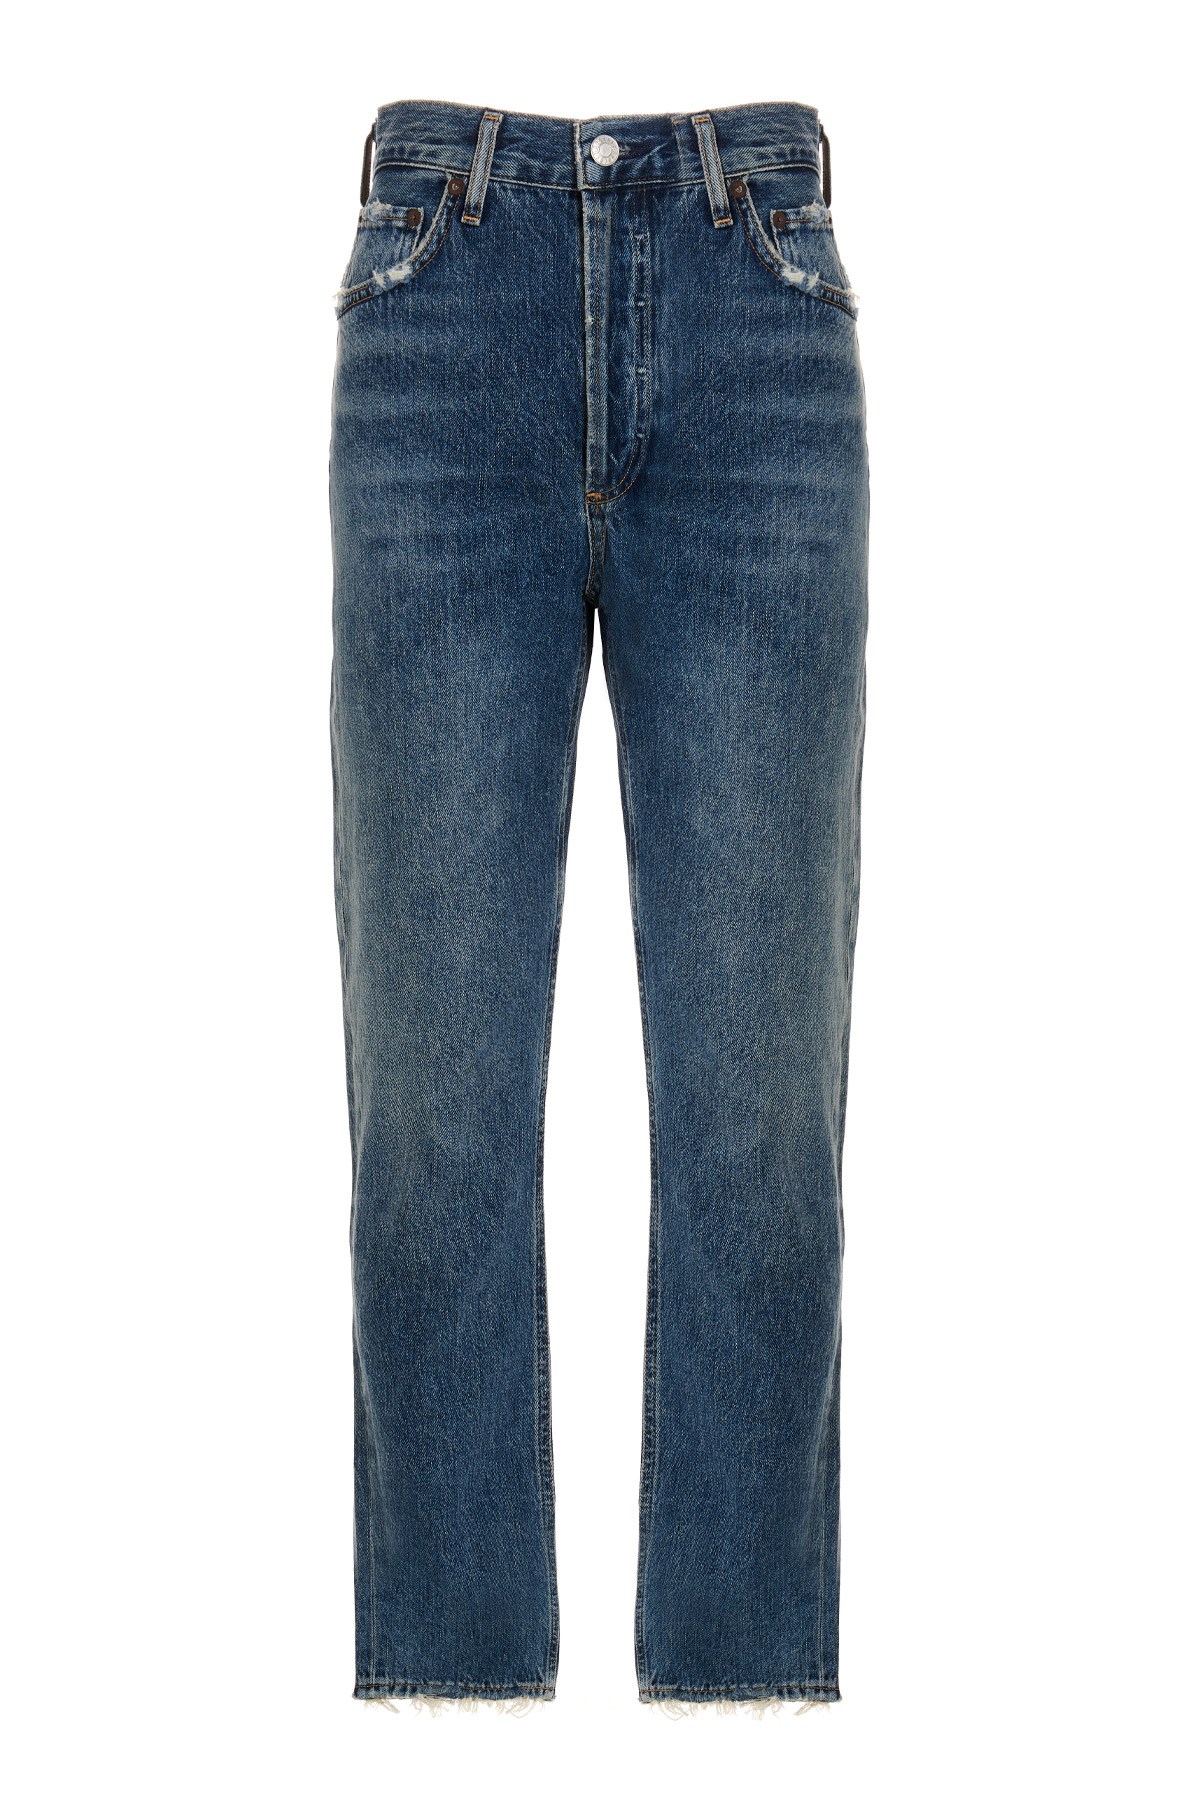 AGOLDE 'Riley Frequency Crop’ Jeans